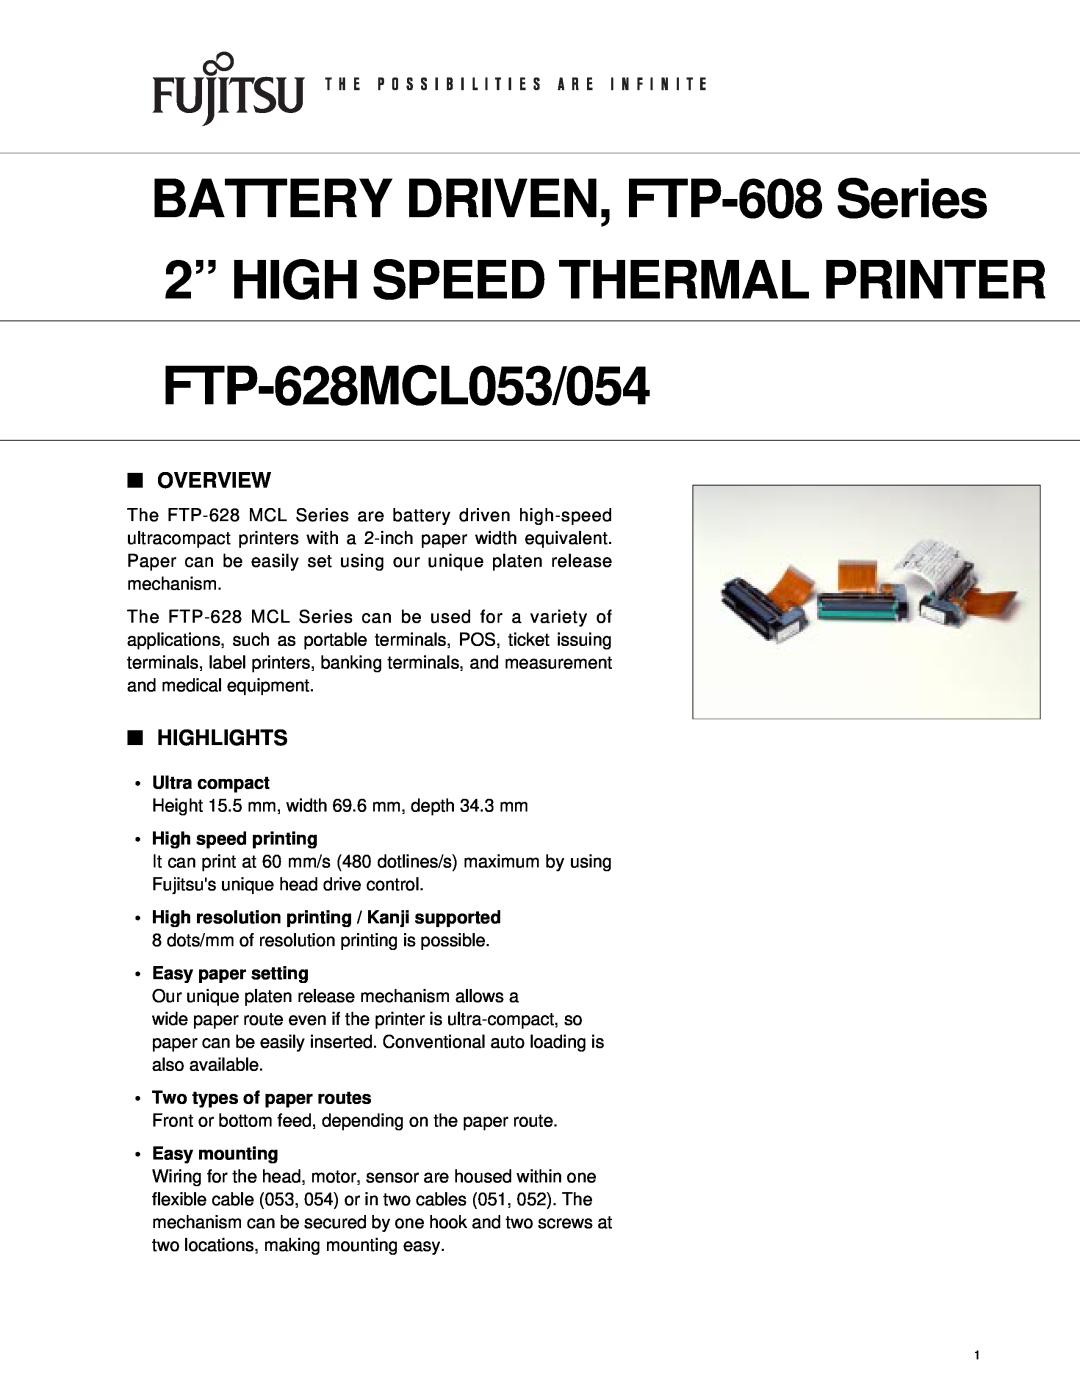 Fujitsu FTP-628MCL054 manual Overview, Highlights, BATTERY DRIVEN, FTP-608 Series, FTP-628MCL053/054, Ultra compact 